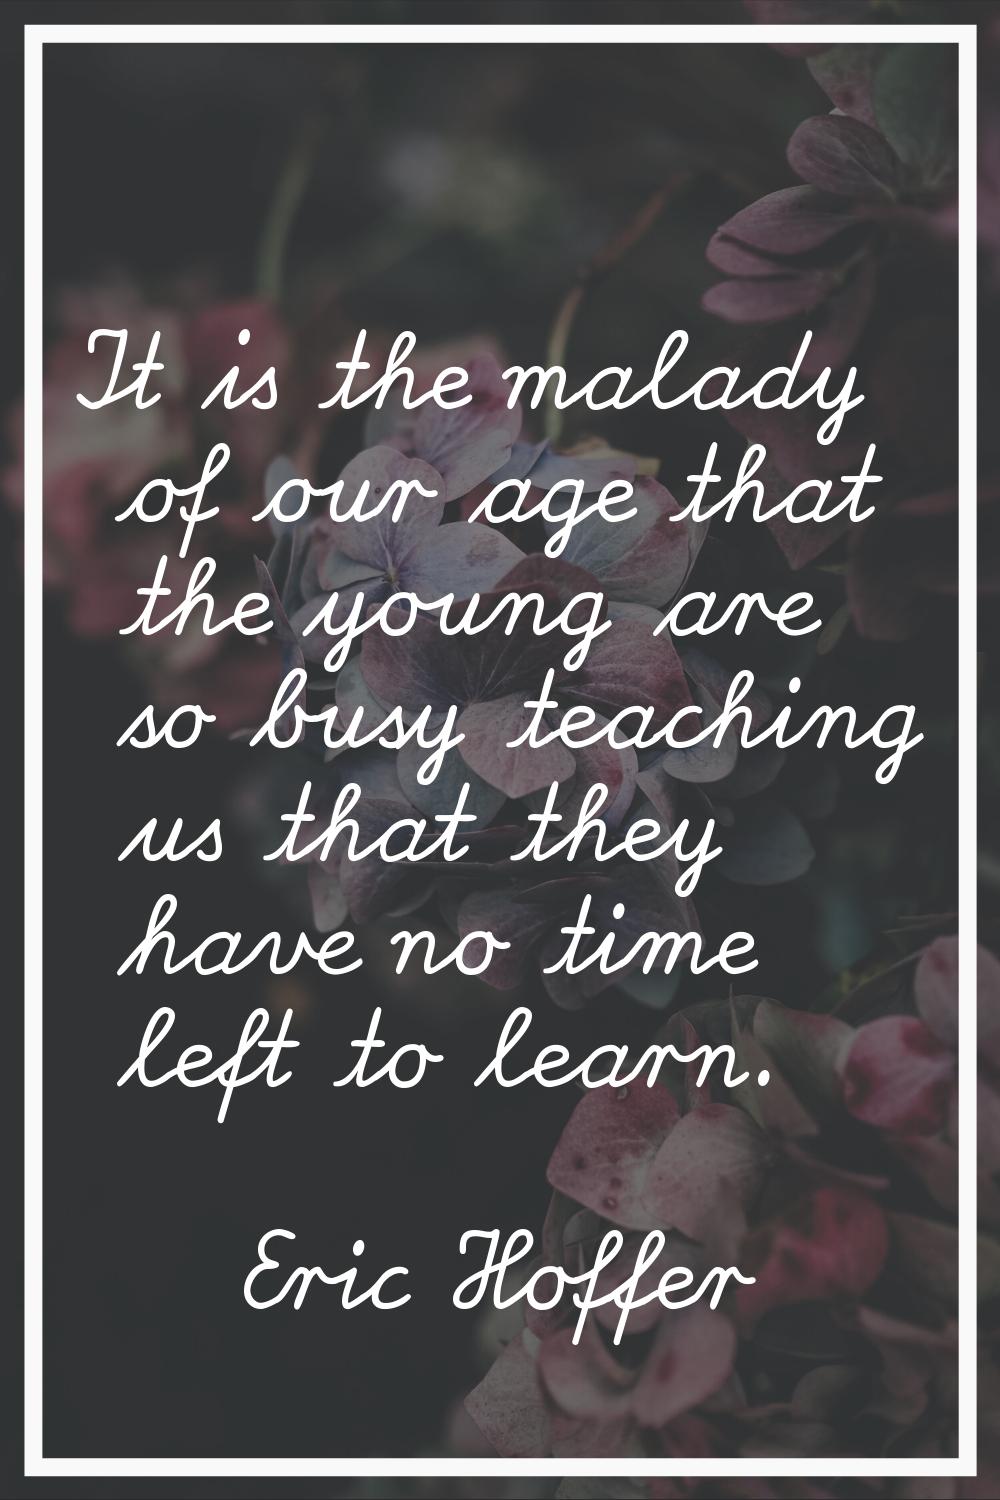 It is the malady of our age that the young are so busy teaching us that they have no time left to l